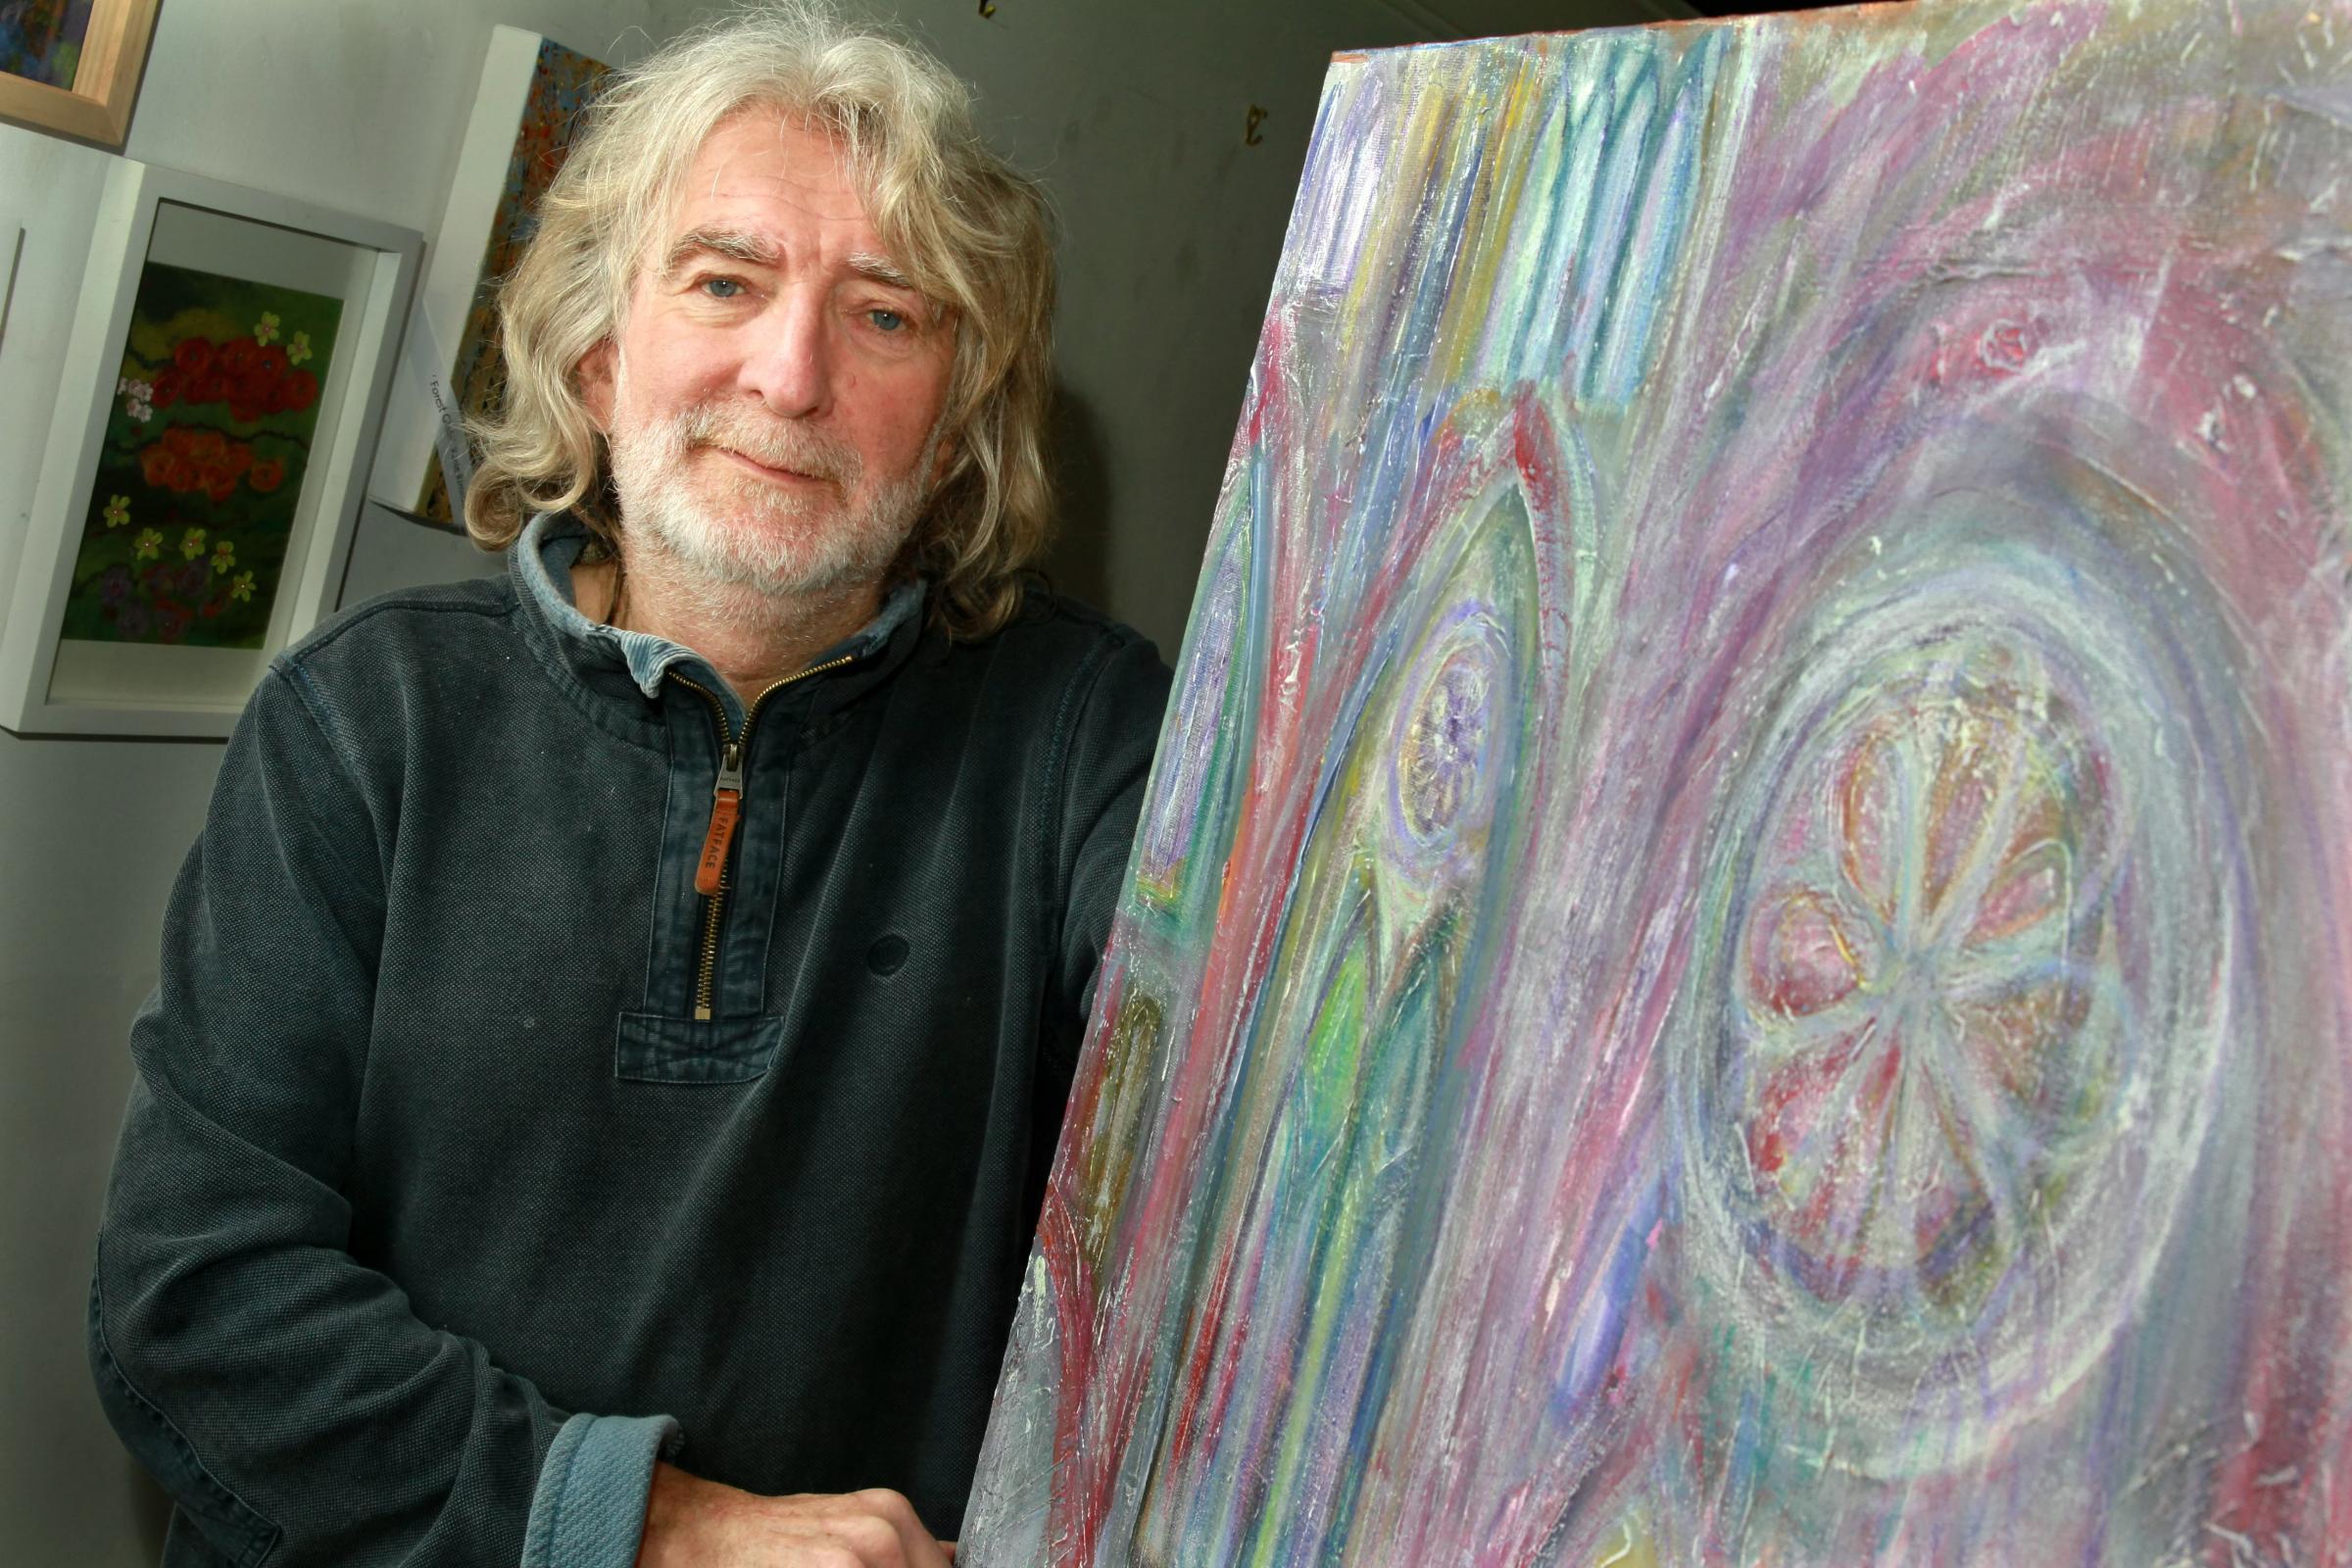 Retired headteacher stages art exhibition of cathedral images